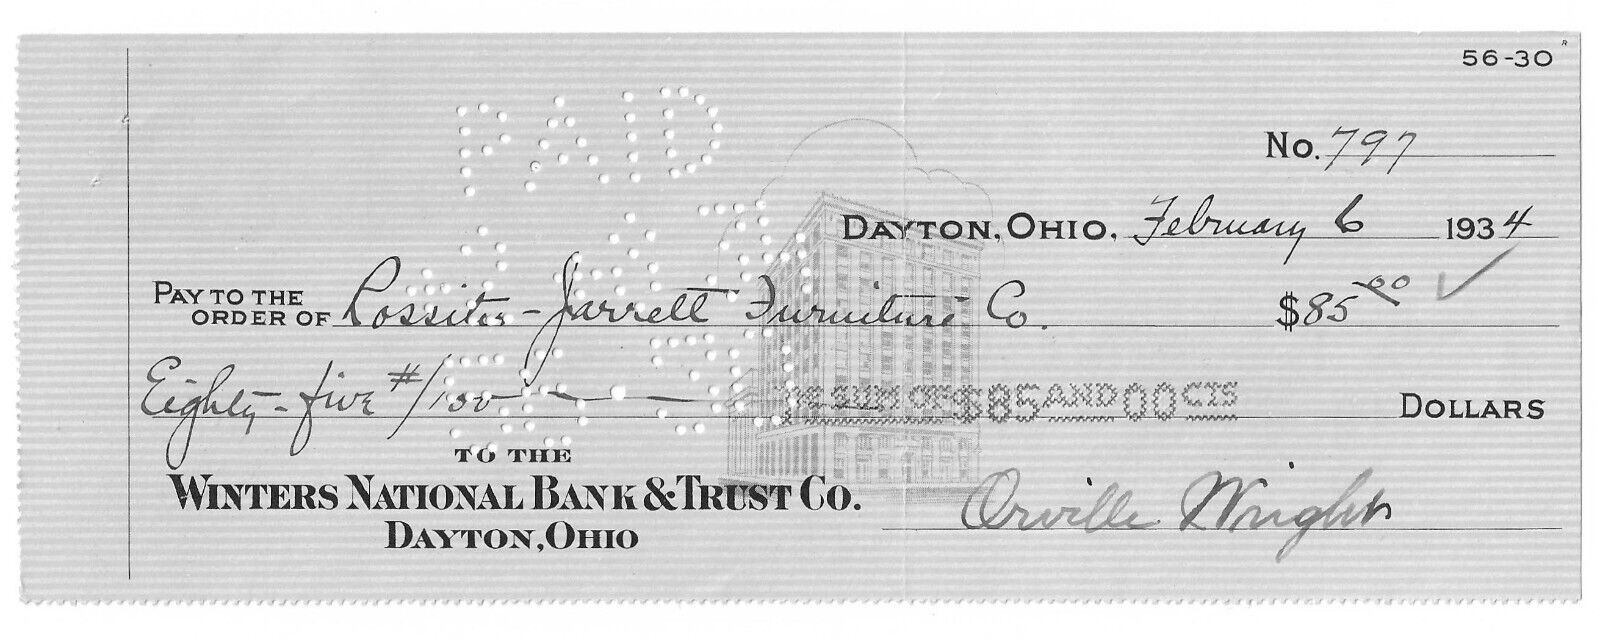 Orville Wright, Father Of American Aviation, Signed Check Payable To Akron Co.